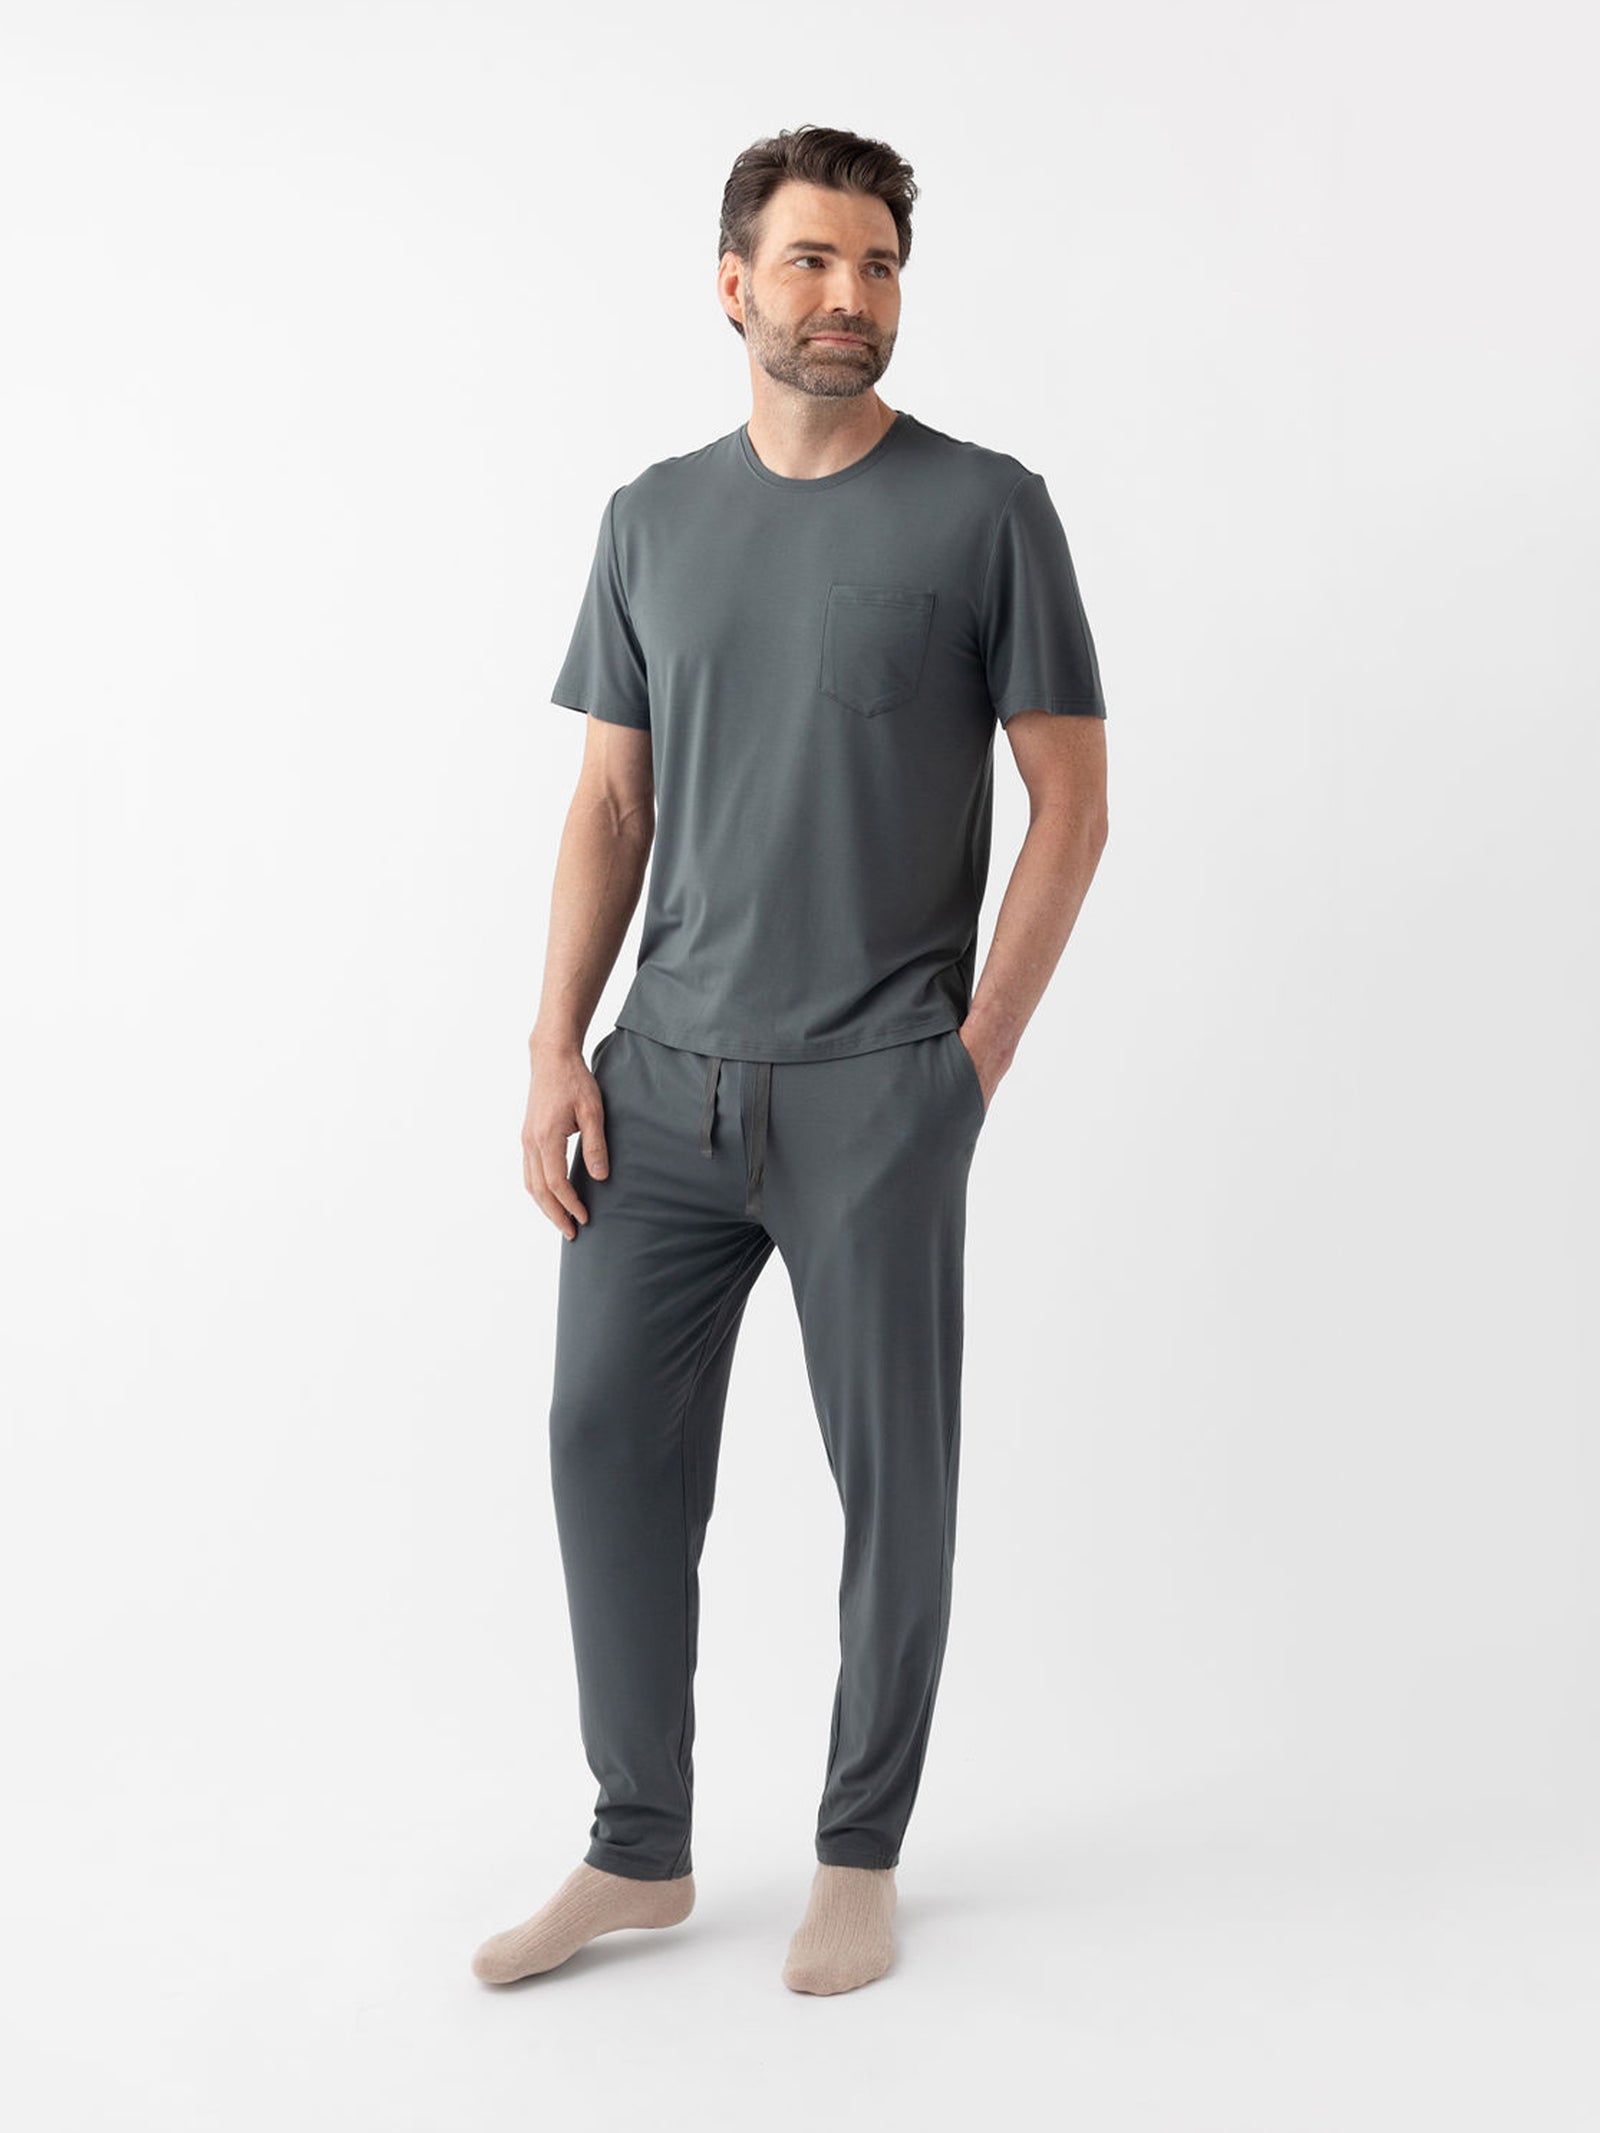 Man wearing storm pajama shirt and pants with a white background 